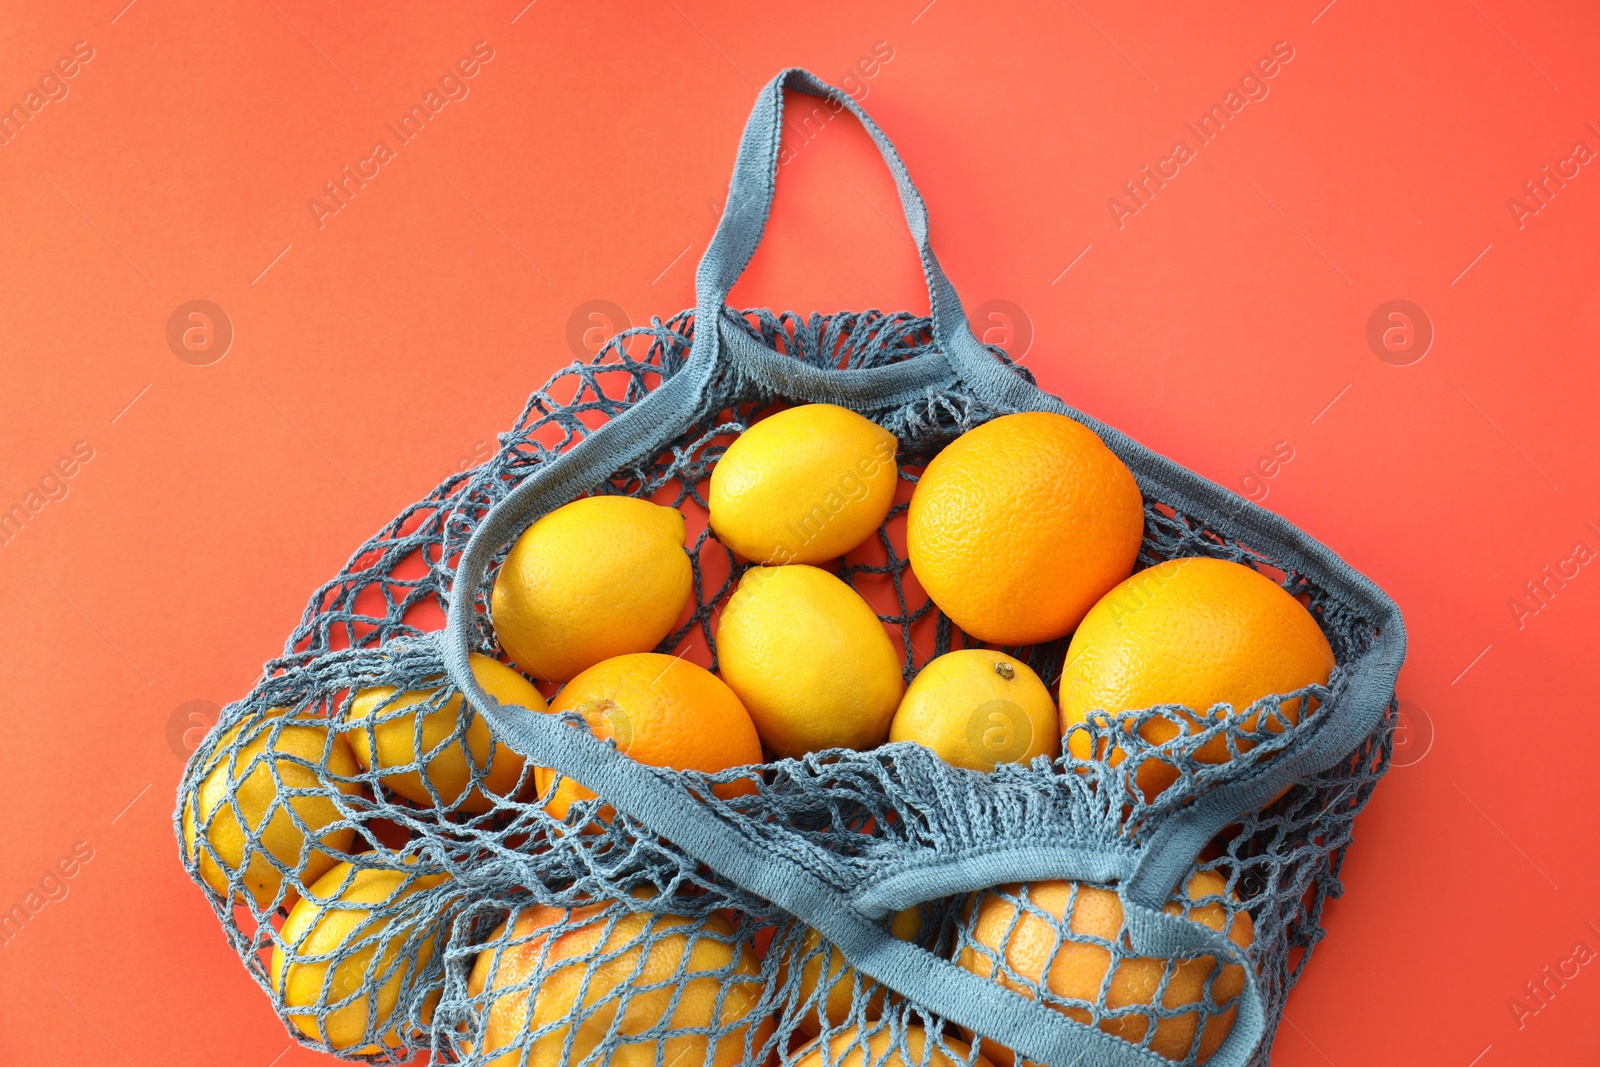 Photo of String bag with oranges and lemons on red background, top view